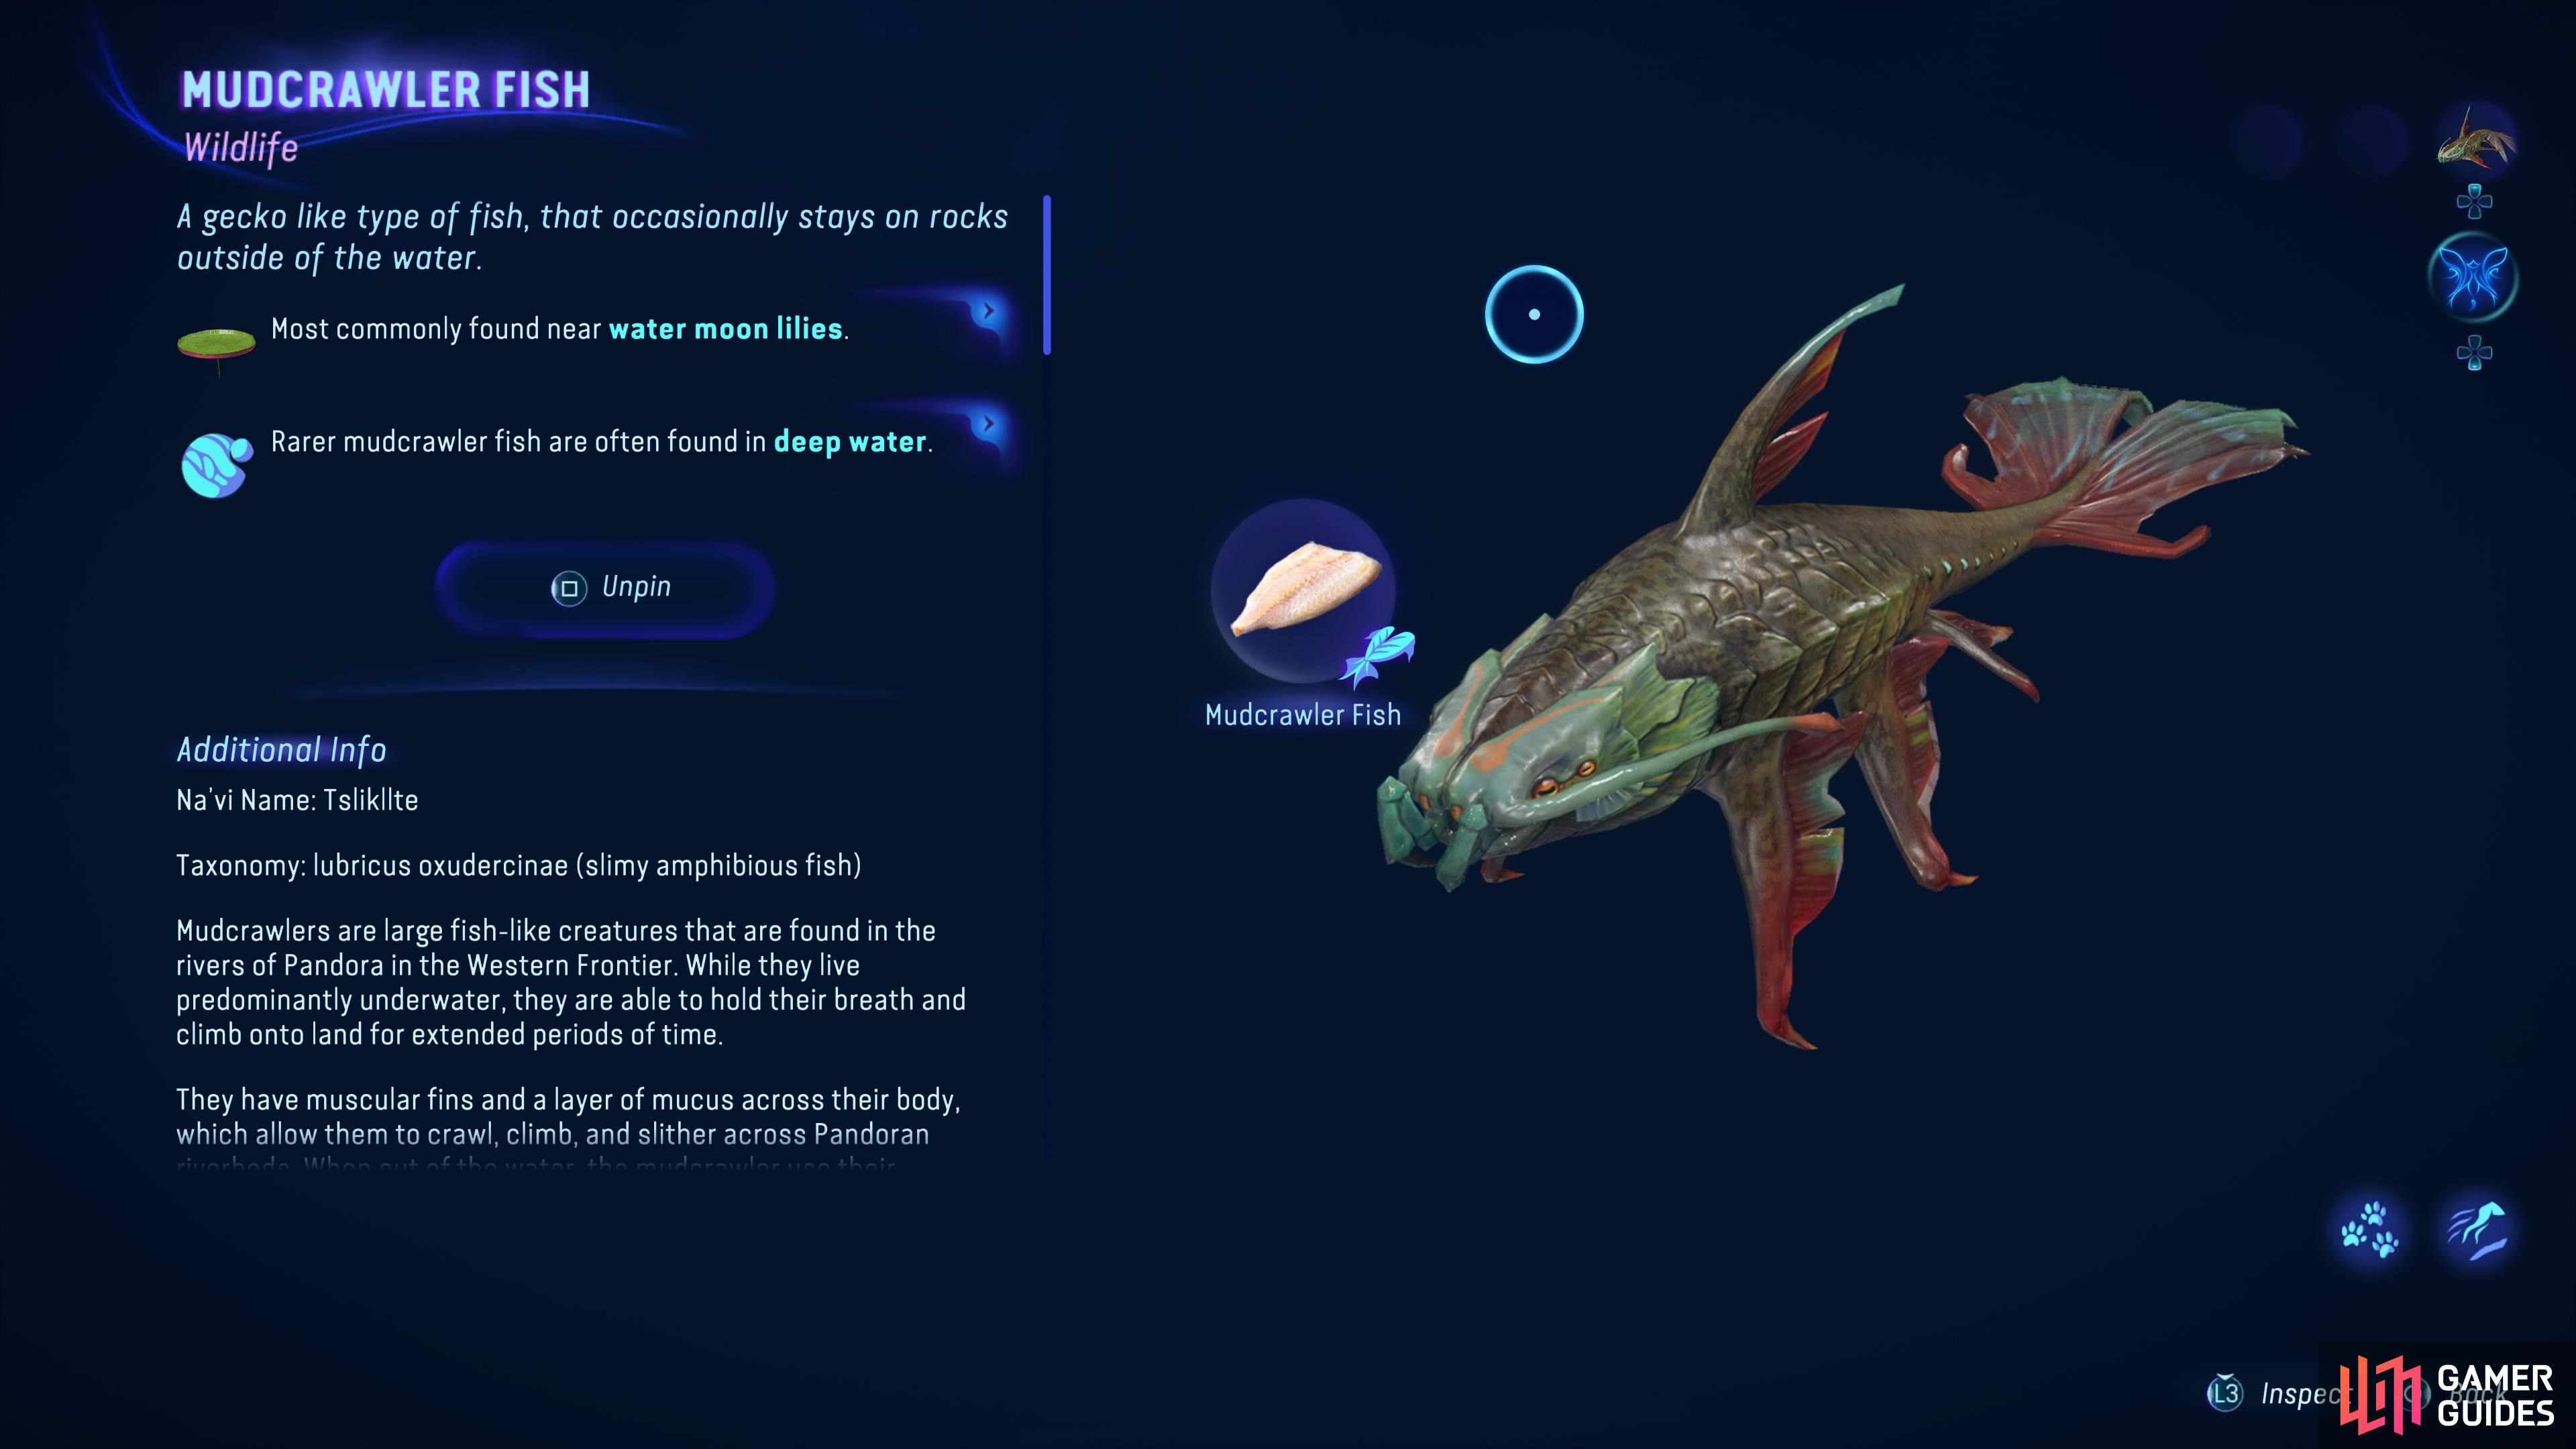 The Mudcrawler is one of many types of fish you can find in the game.